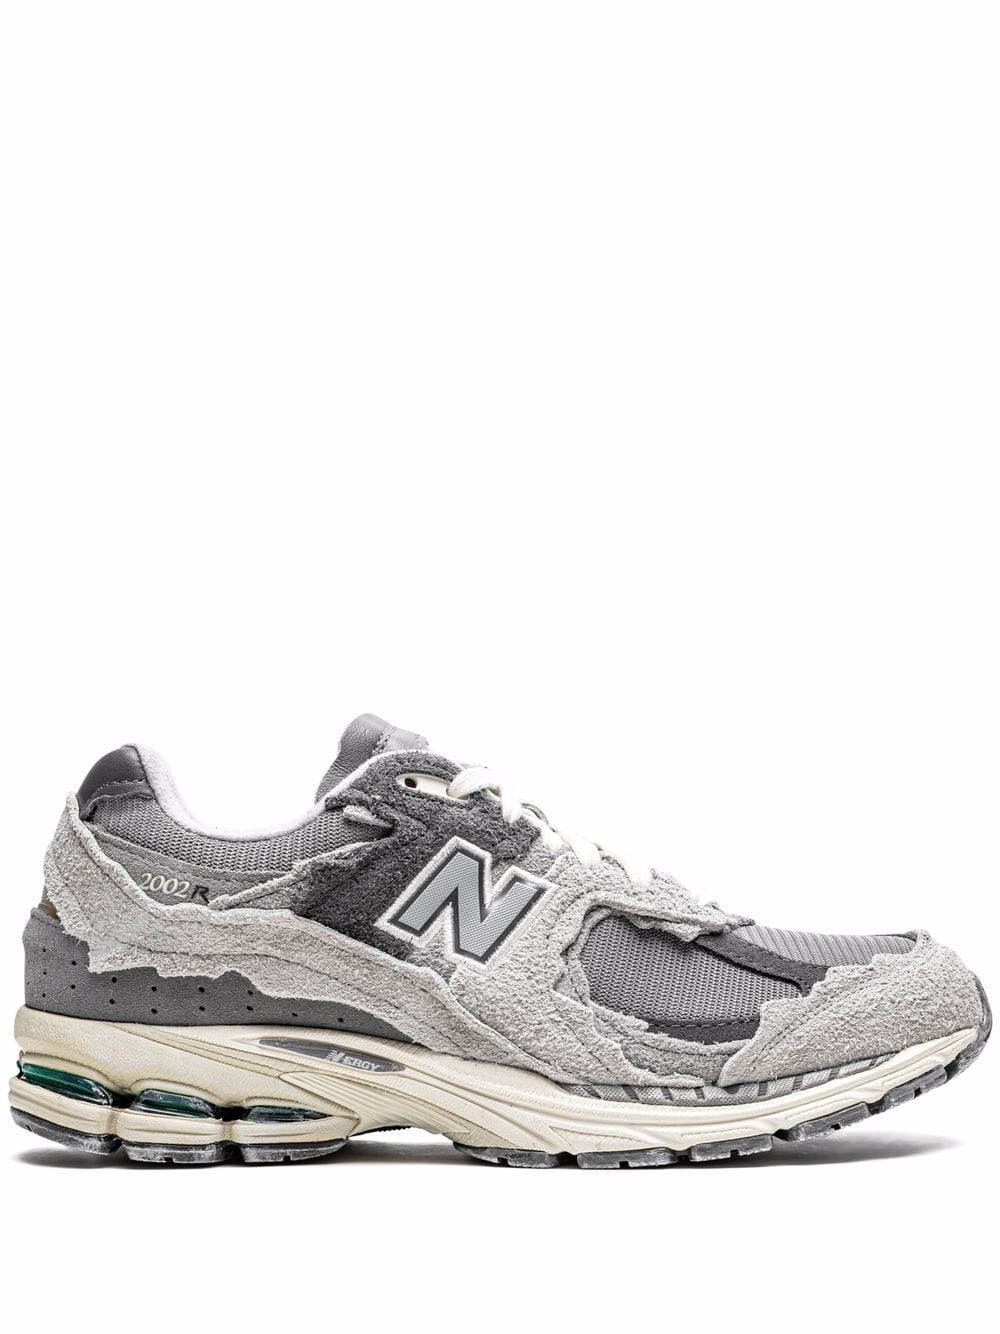 Image 1 of New Balance 2002R "Protection Pack - Grey" sneakers